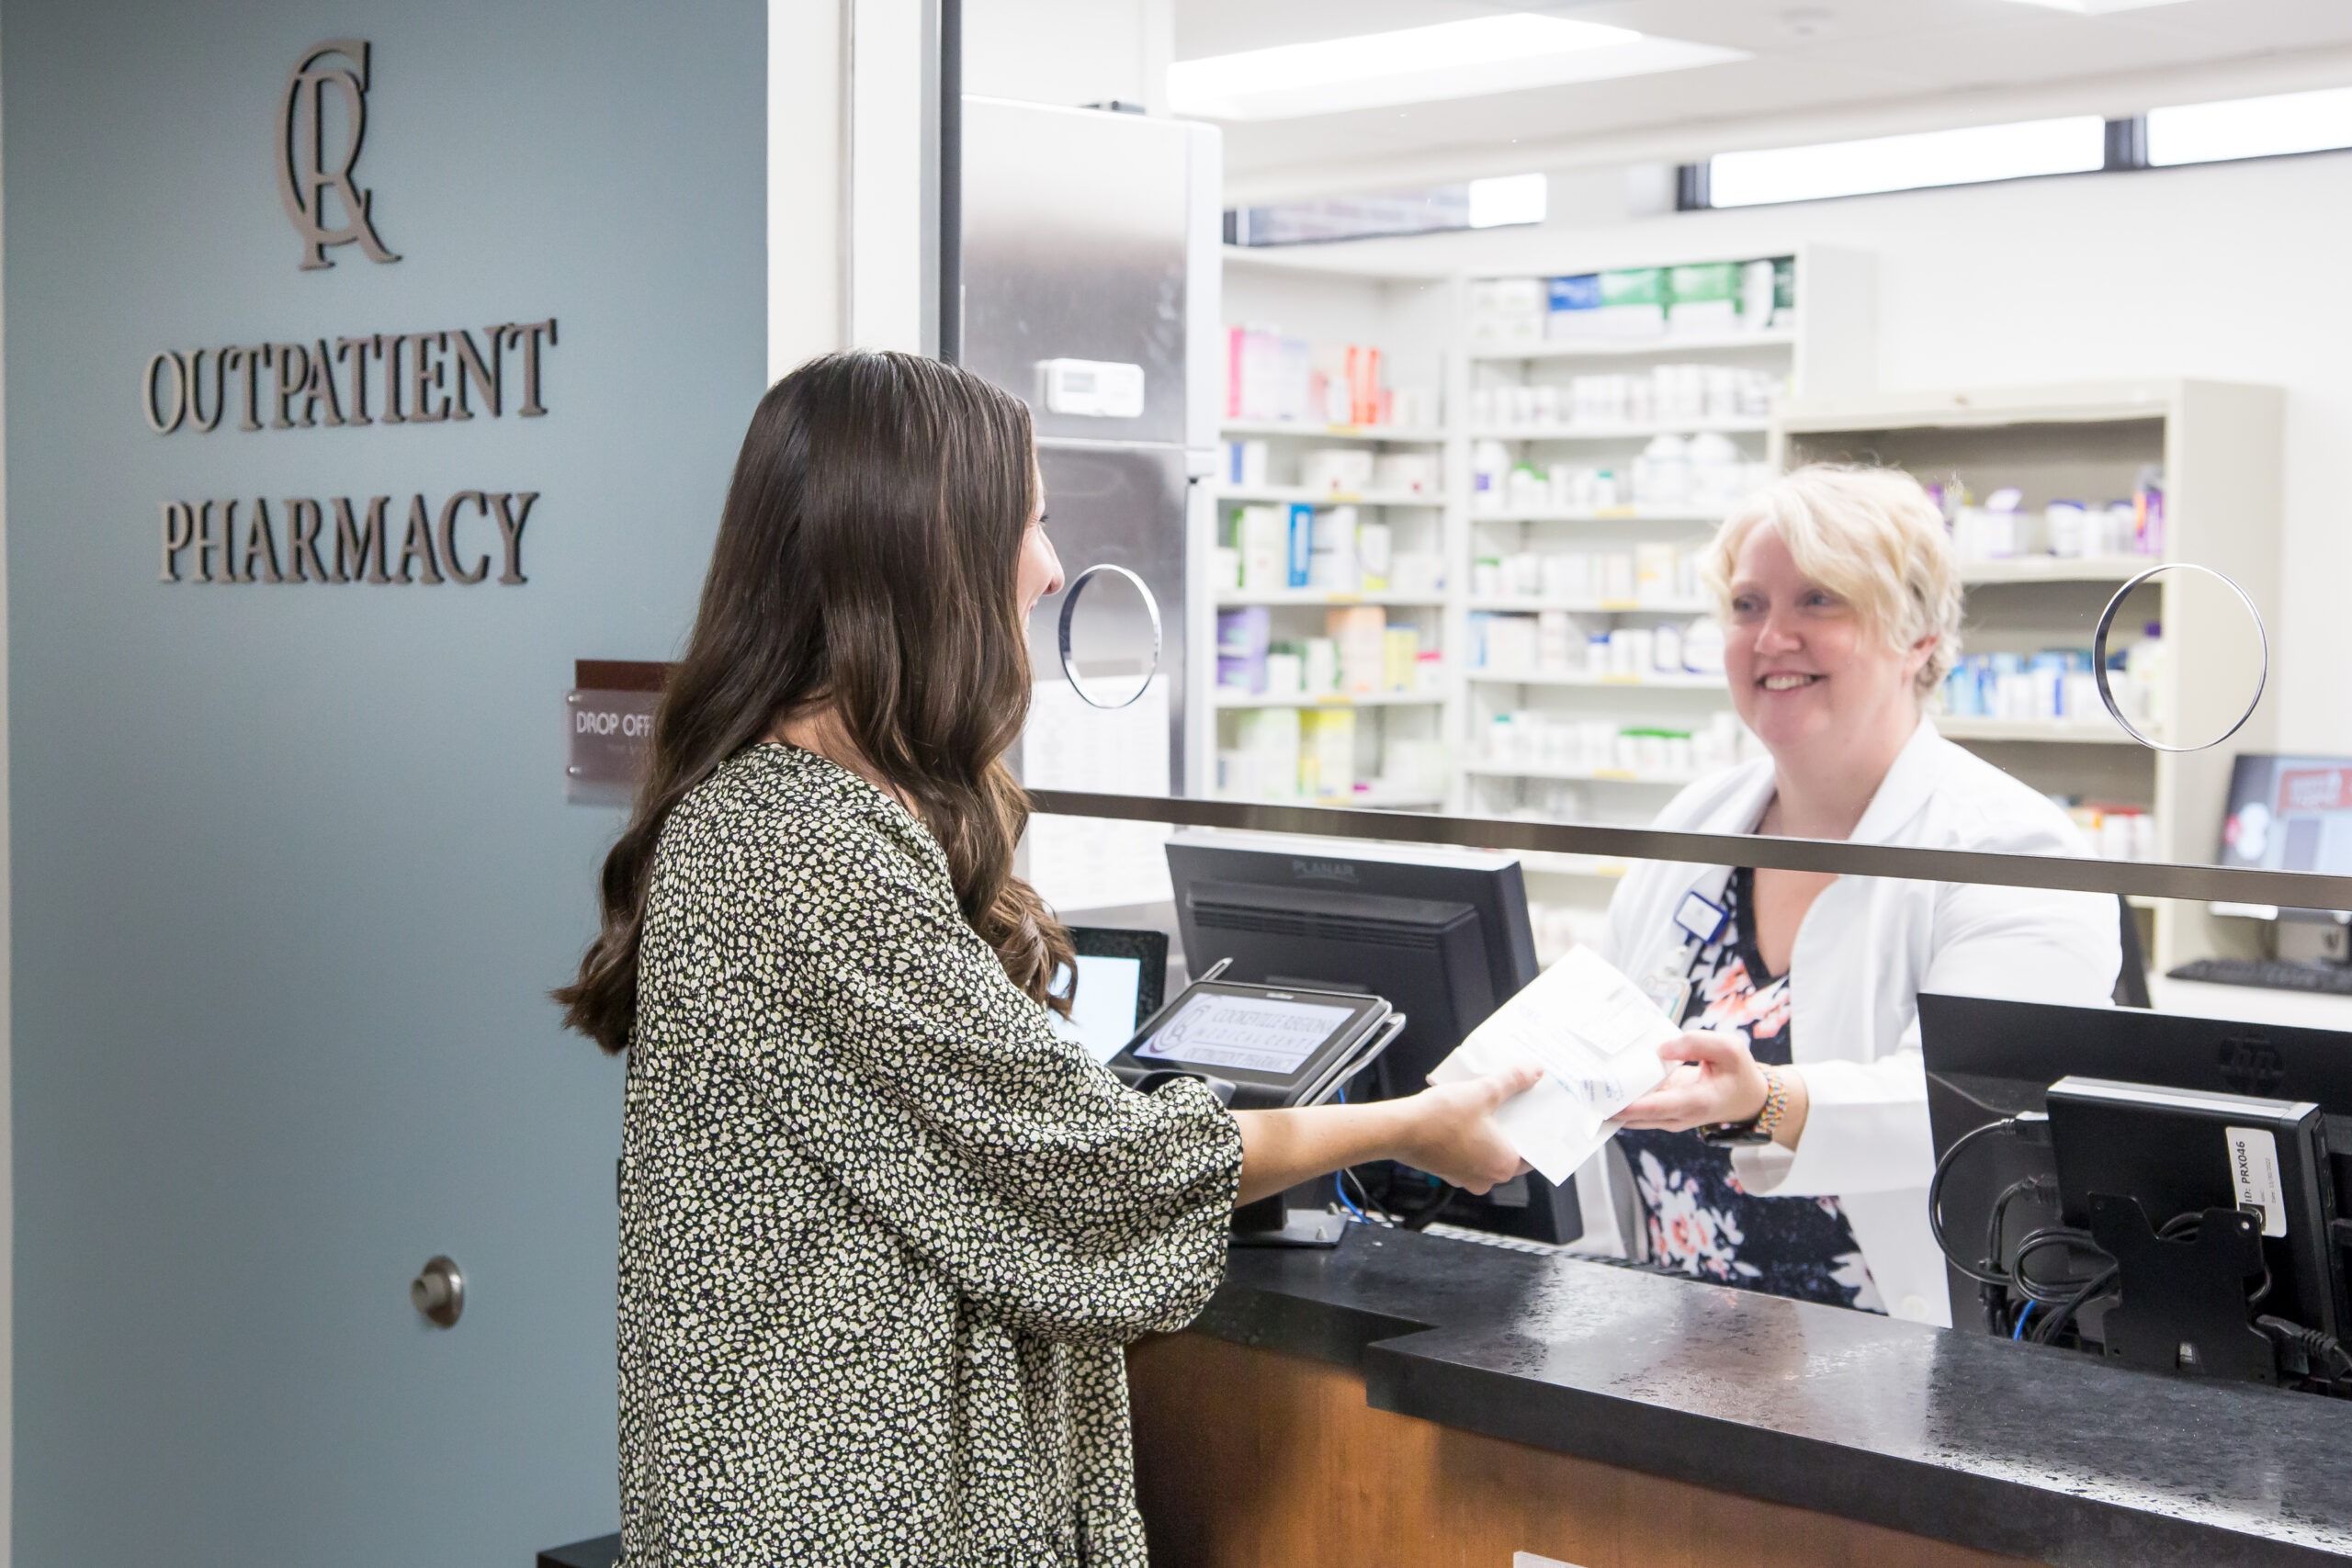 A customer picks up a prescription at CRMC’s Outpatient Pharmacy window.